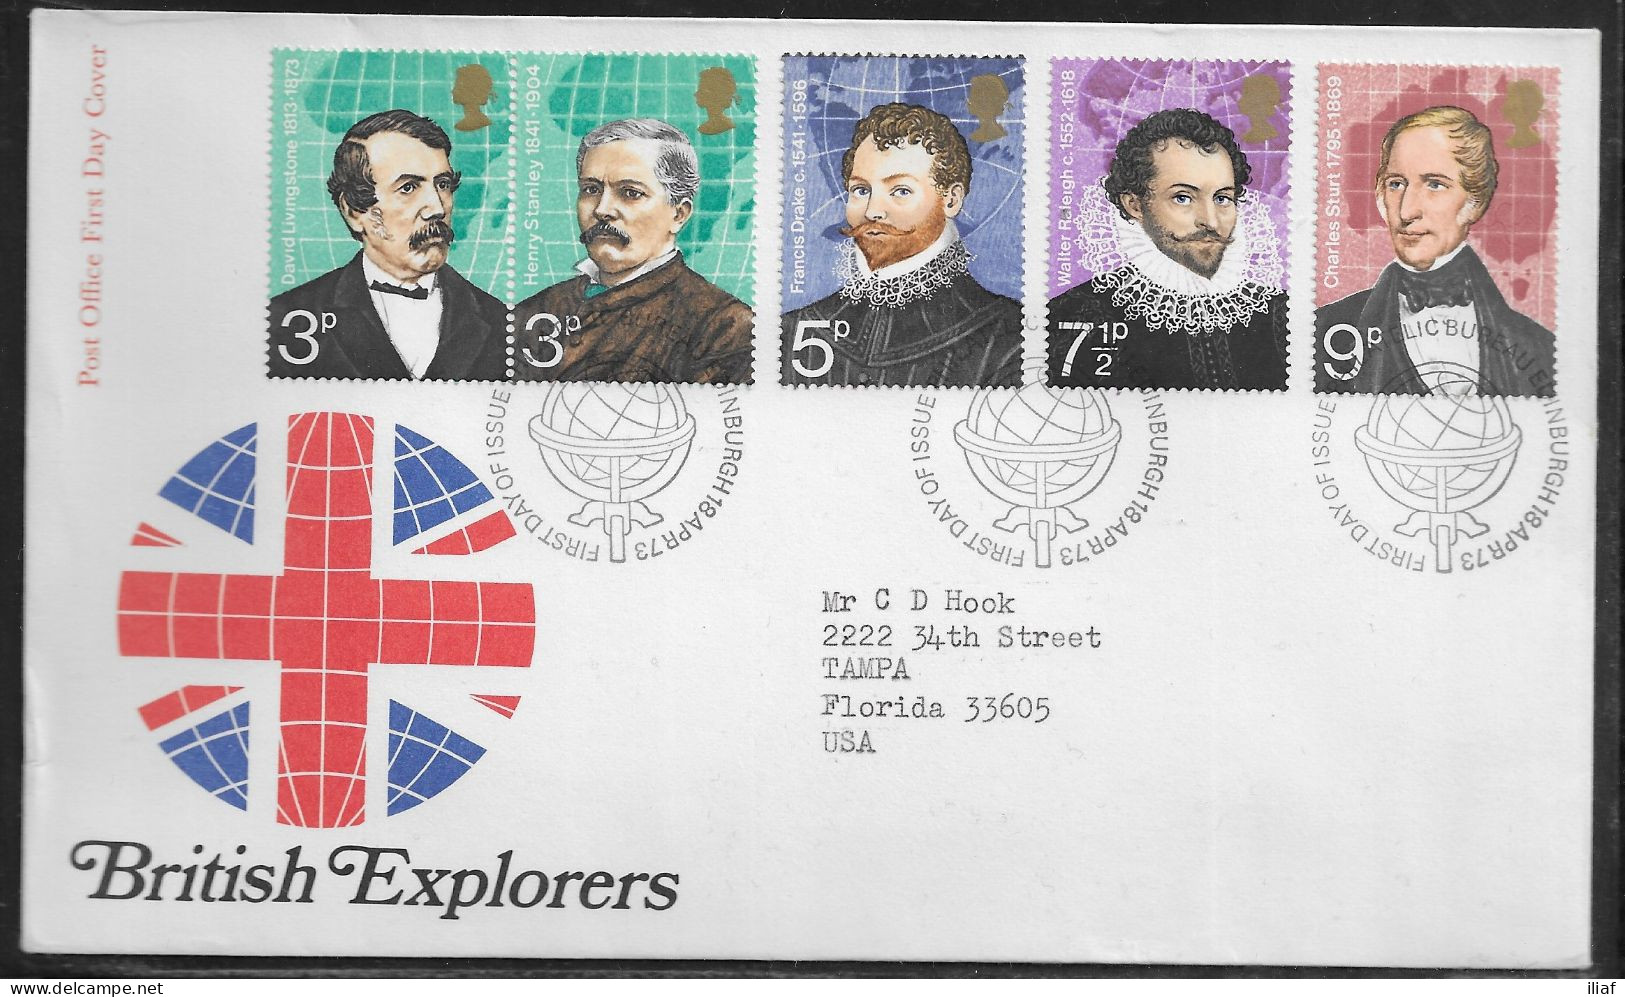 United Kingdom Of Great Britain.  FDC Sc. 690A, 691-693.  British Explorers.  FDC Cancellation On FDC Envelope - 1971-1980 Decimal Issues